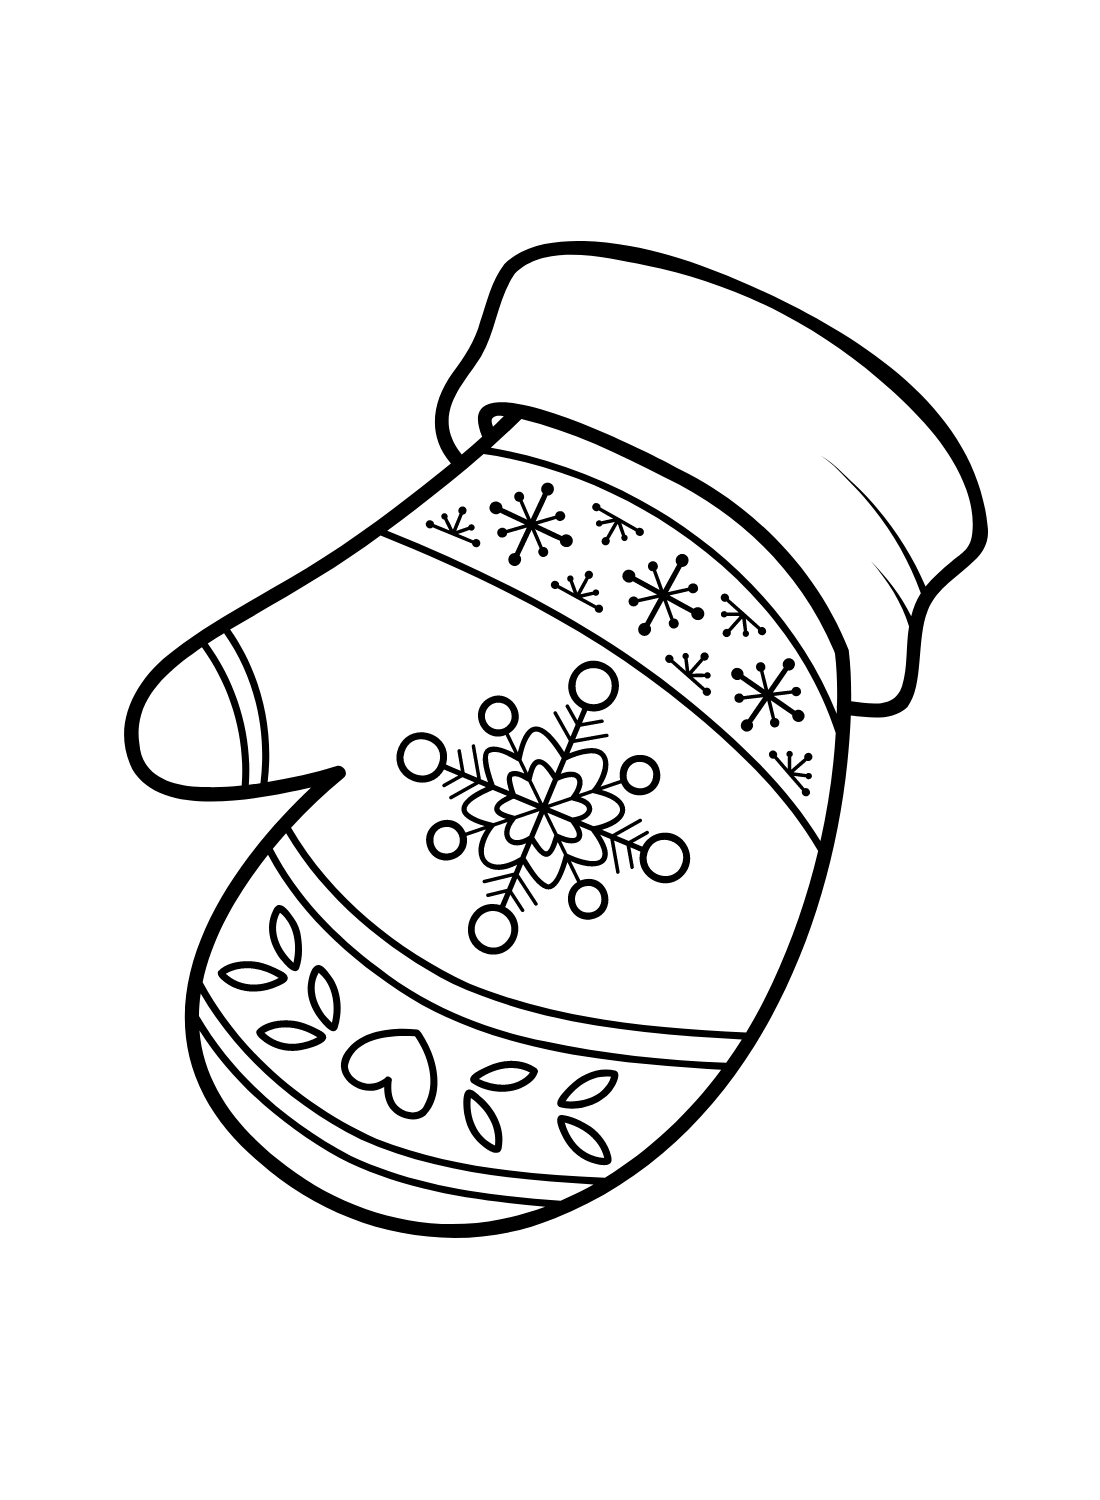 Cute Mittens Coloring Page